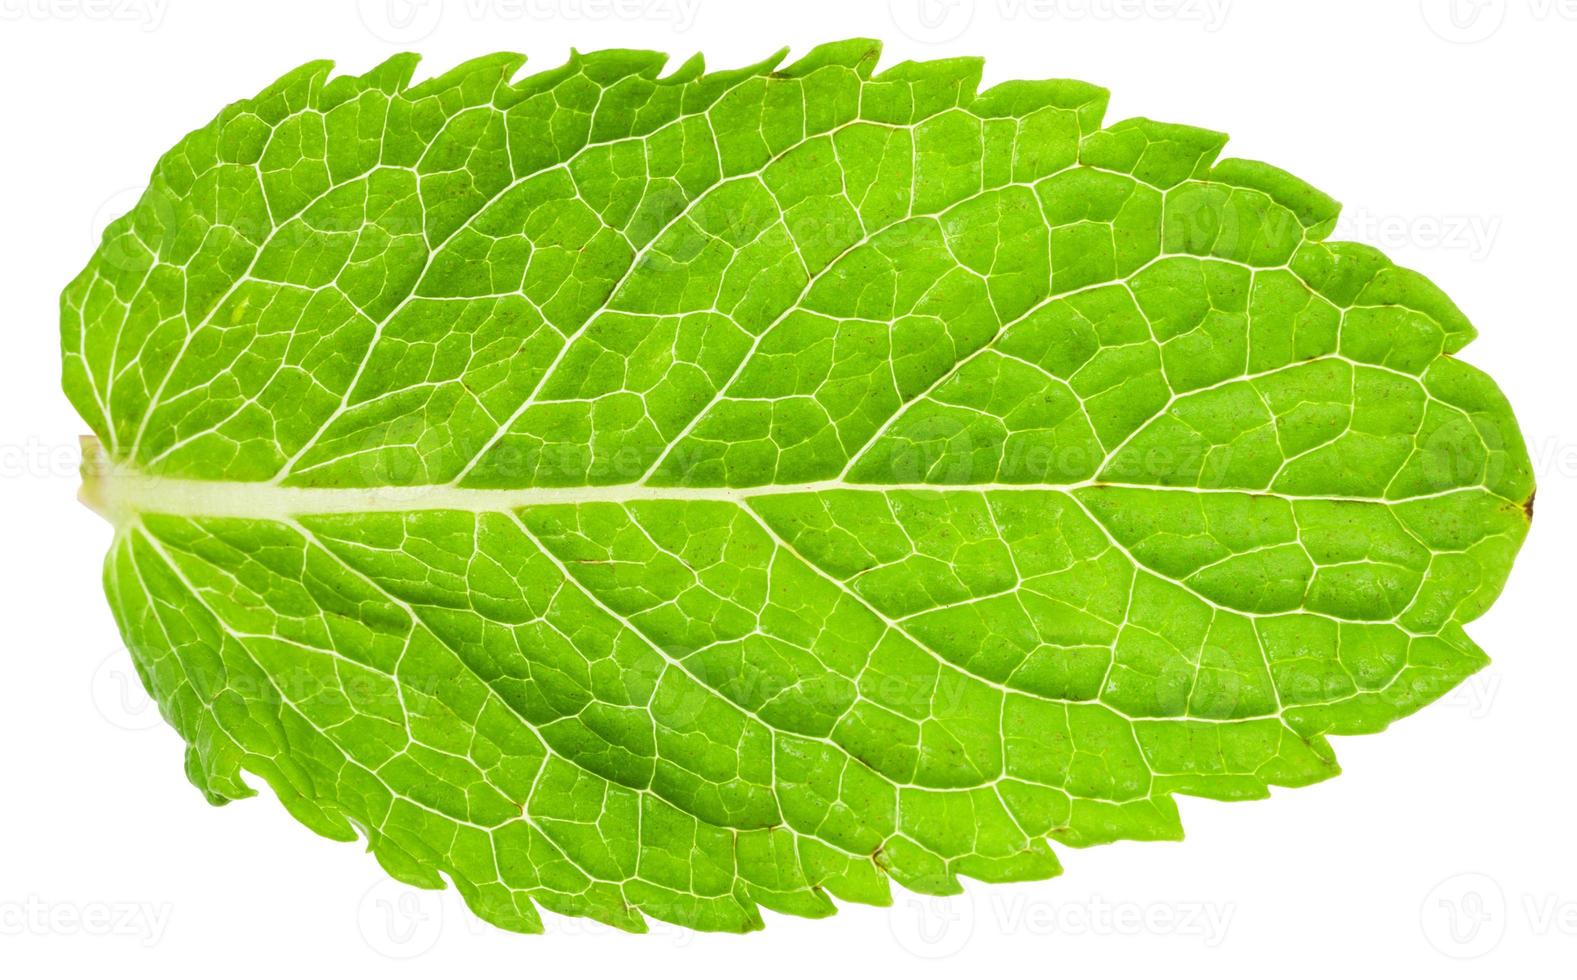 green leaf of mint Peppermint isolated on white photo